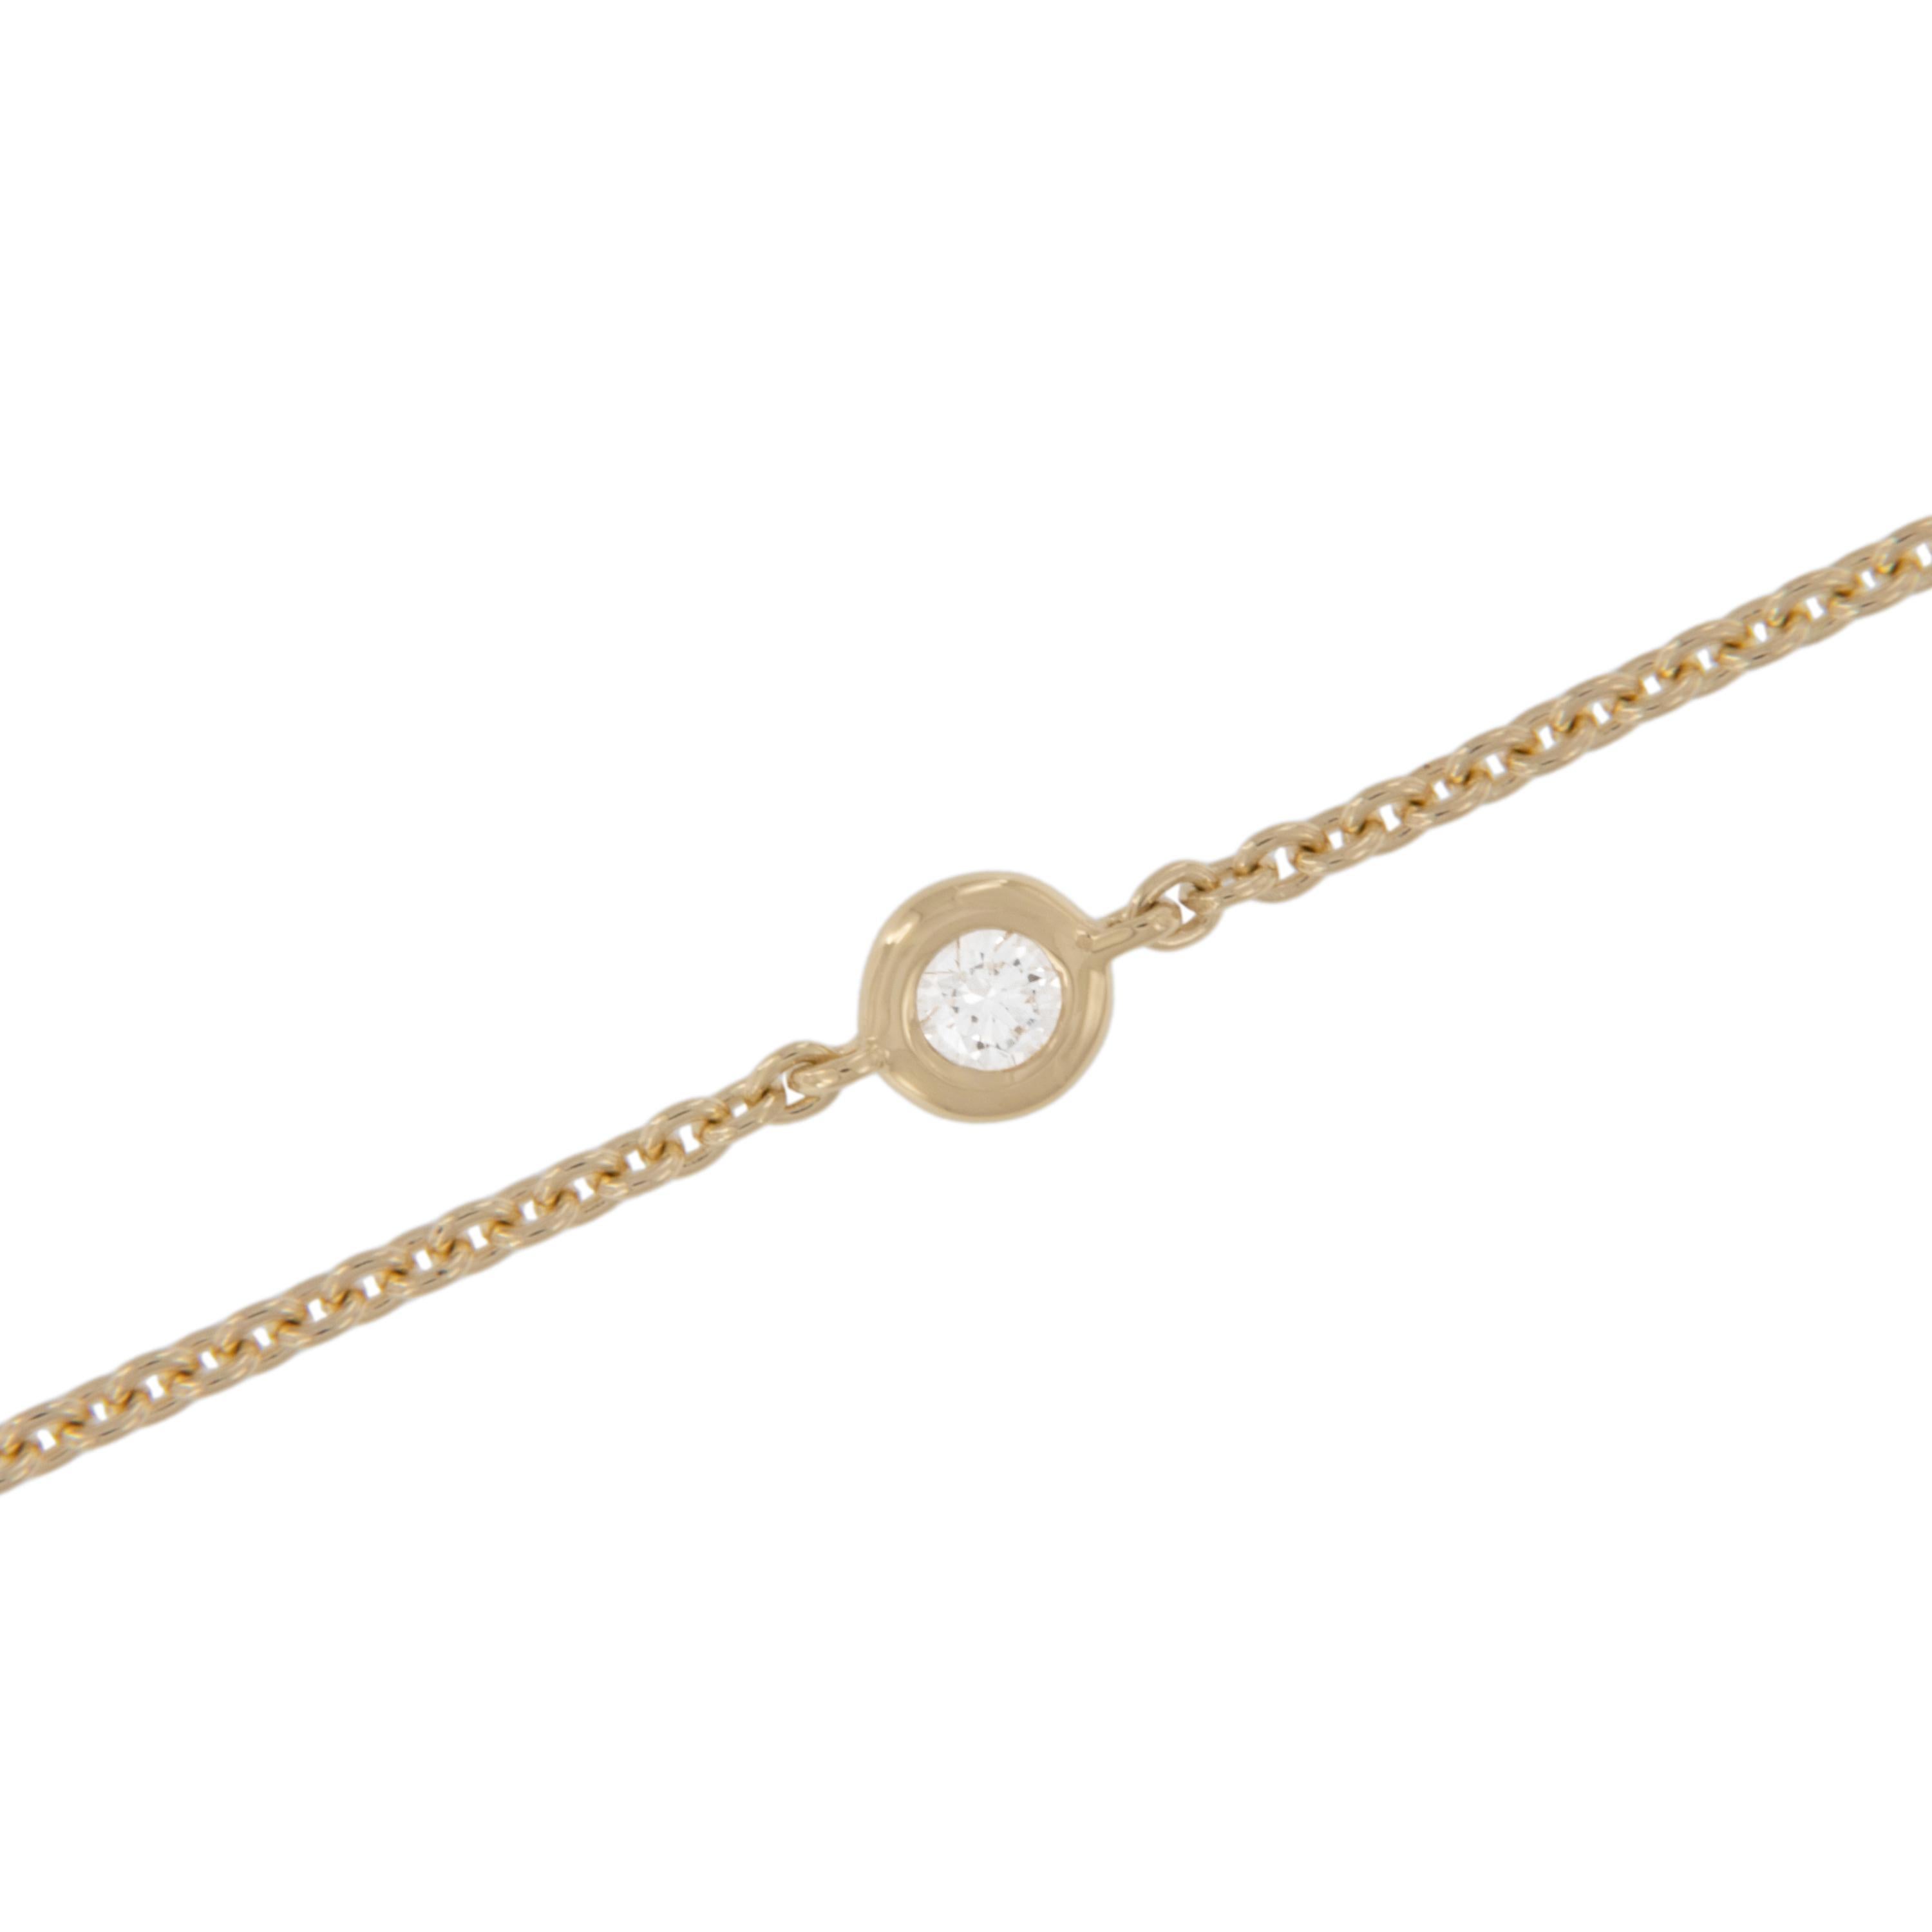 Rich 18 karat yellow gold with six fine quality diamonds = 0.37 Cttw (VS clarity, G-H color) this station necklace stands the test of time! You can wear every day with jeans and a t-shirt and looks fabulous with other necklaces for a stylish layered